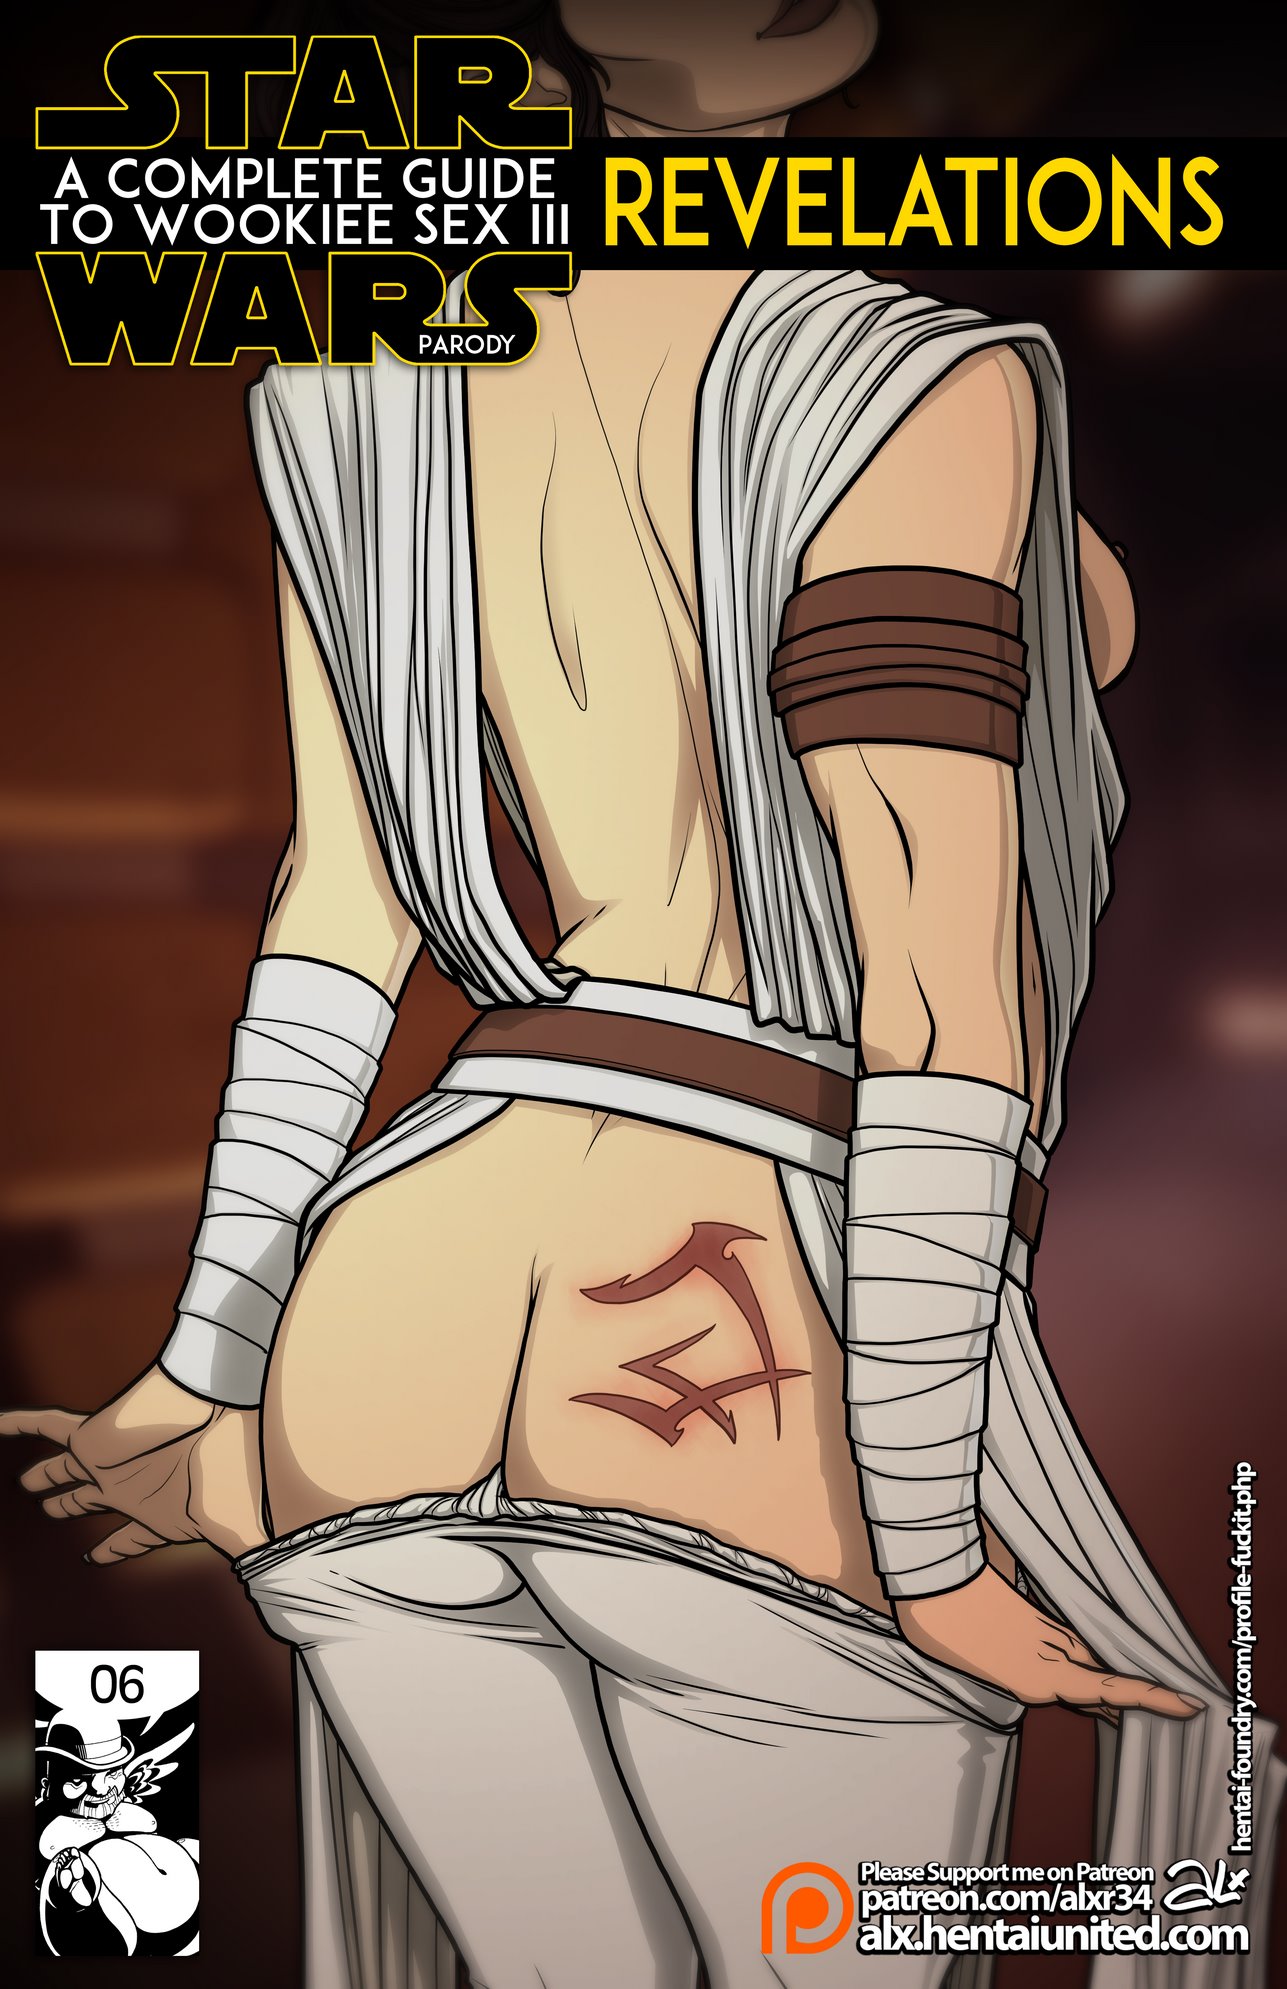 Sex Slave Star Wars Porn - Alx) Star Wars: A Complete Guide to Wookie Sex III porn comic